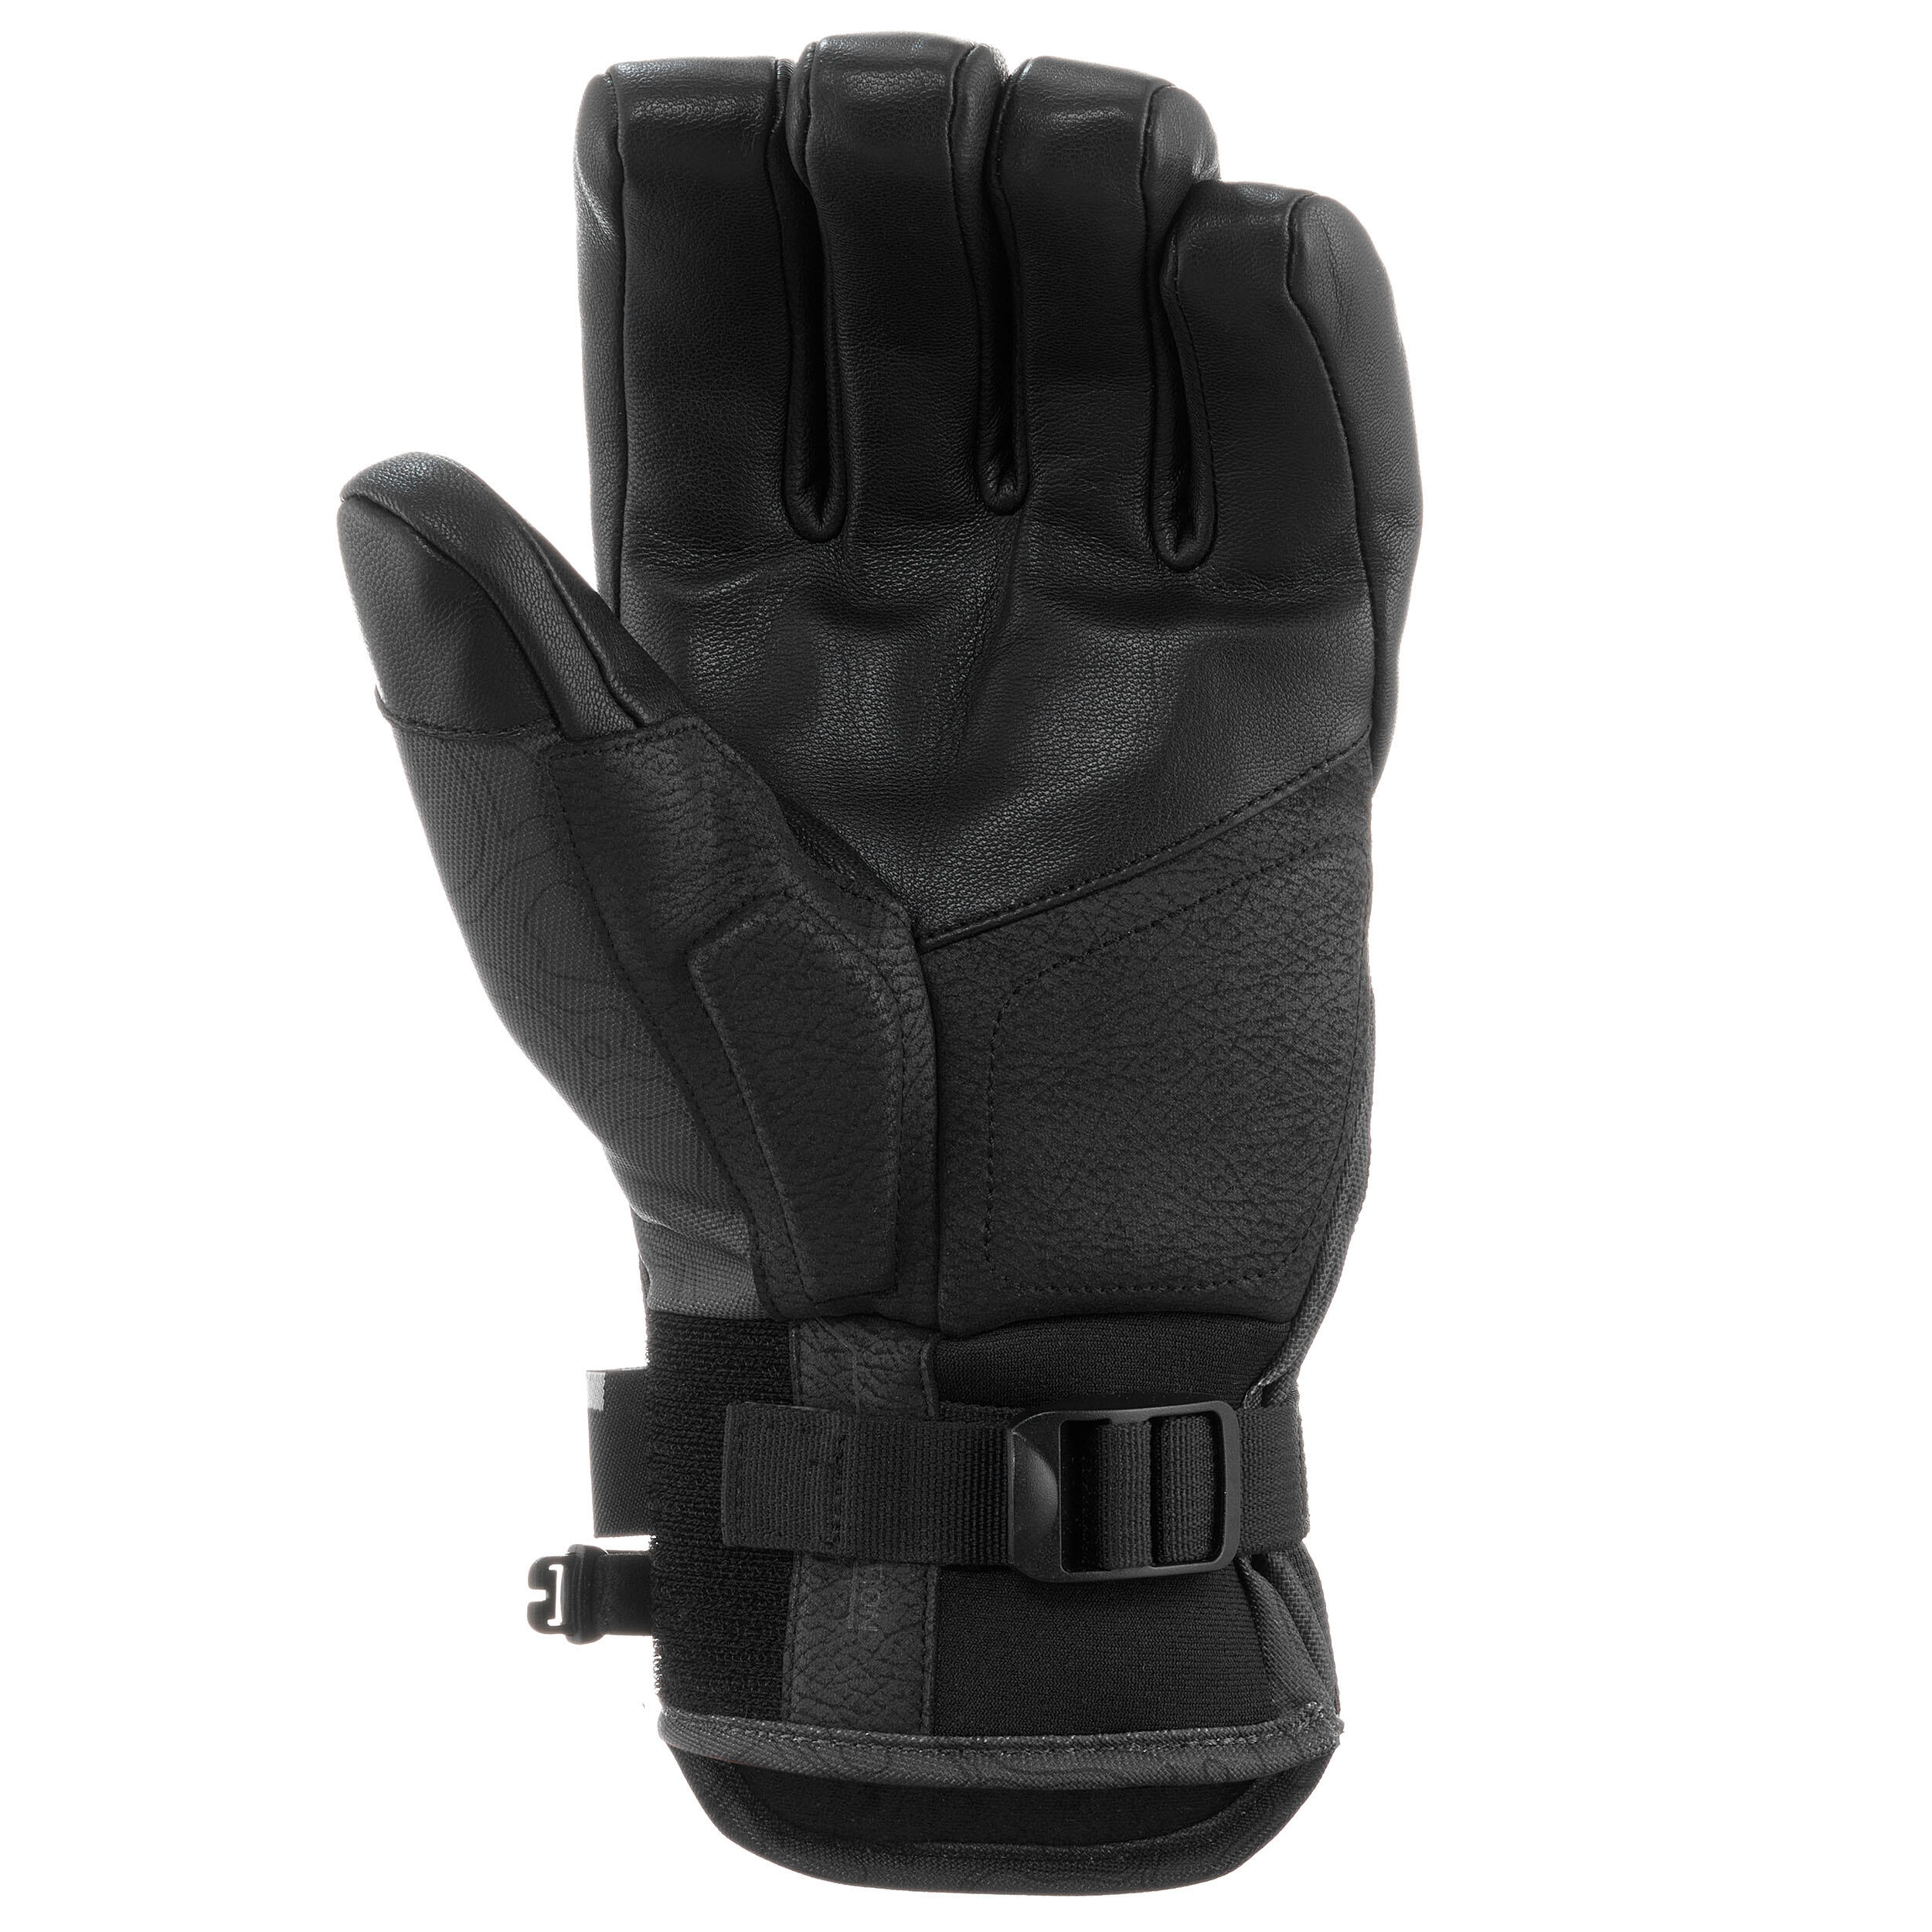 ADULT SNOWBOARD GLOVES - 580 PROTEC GREY 4/5